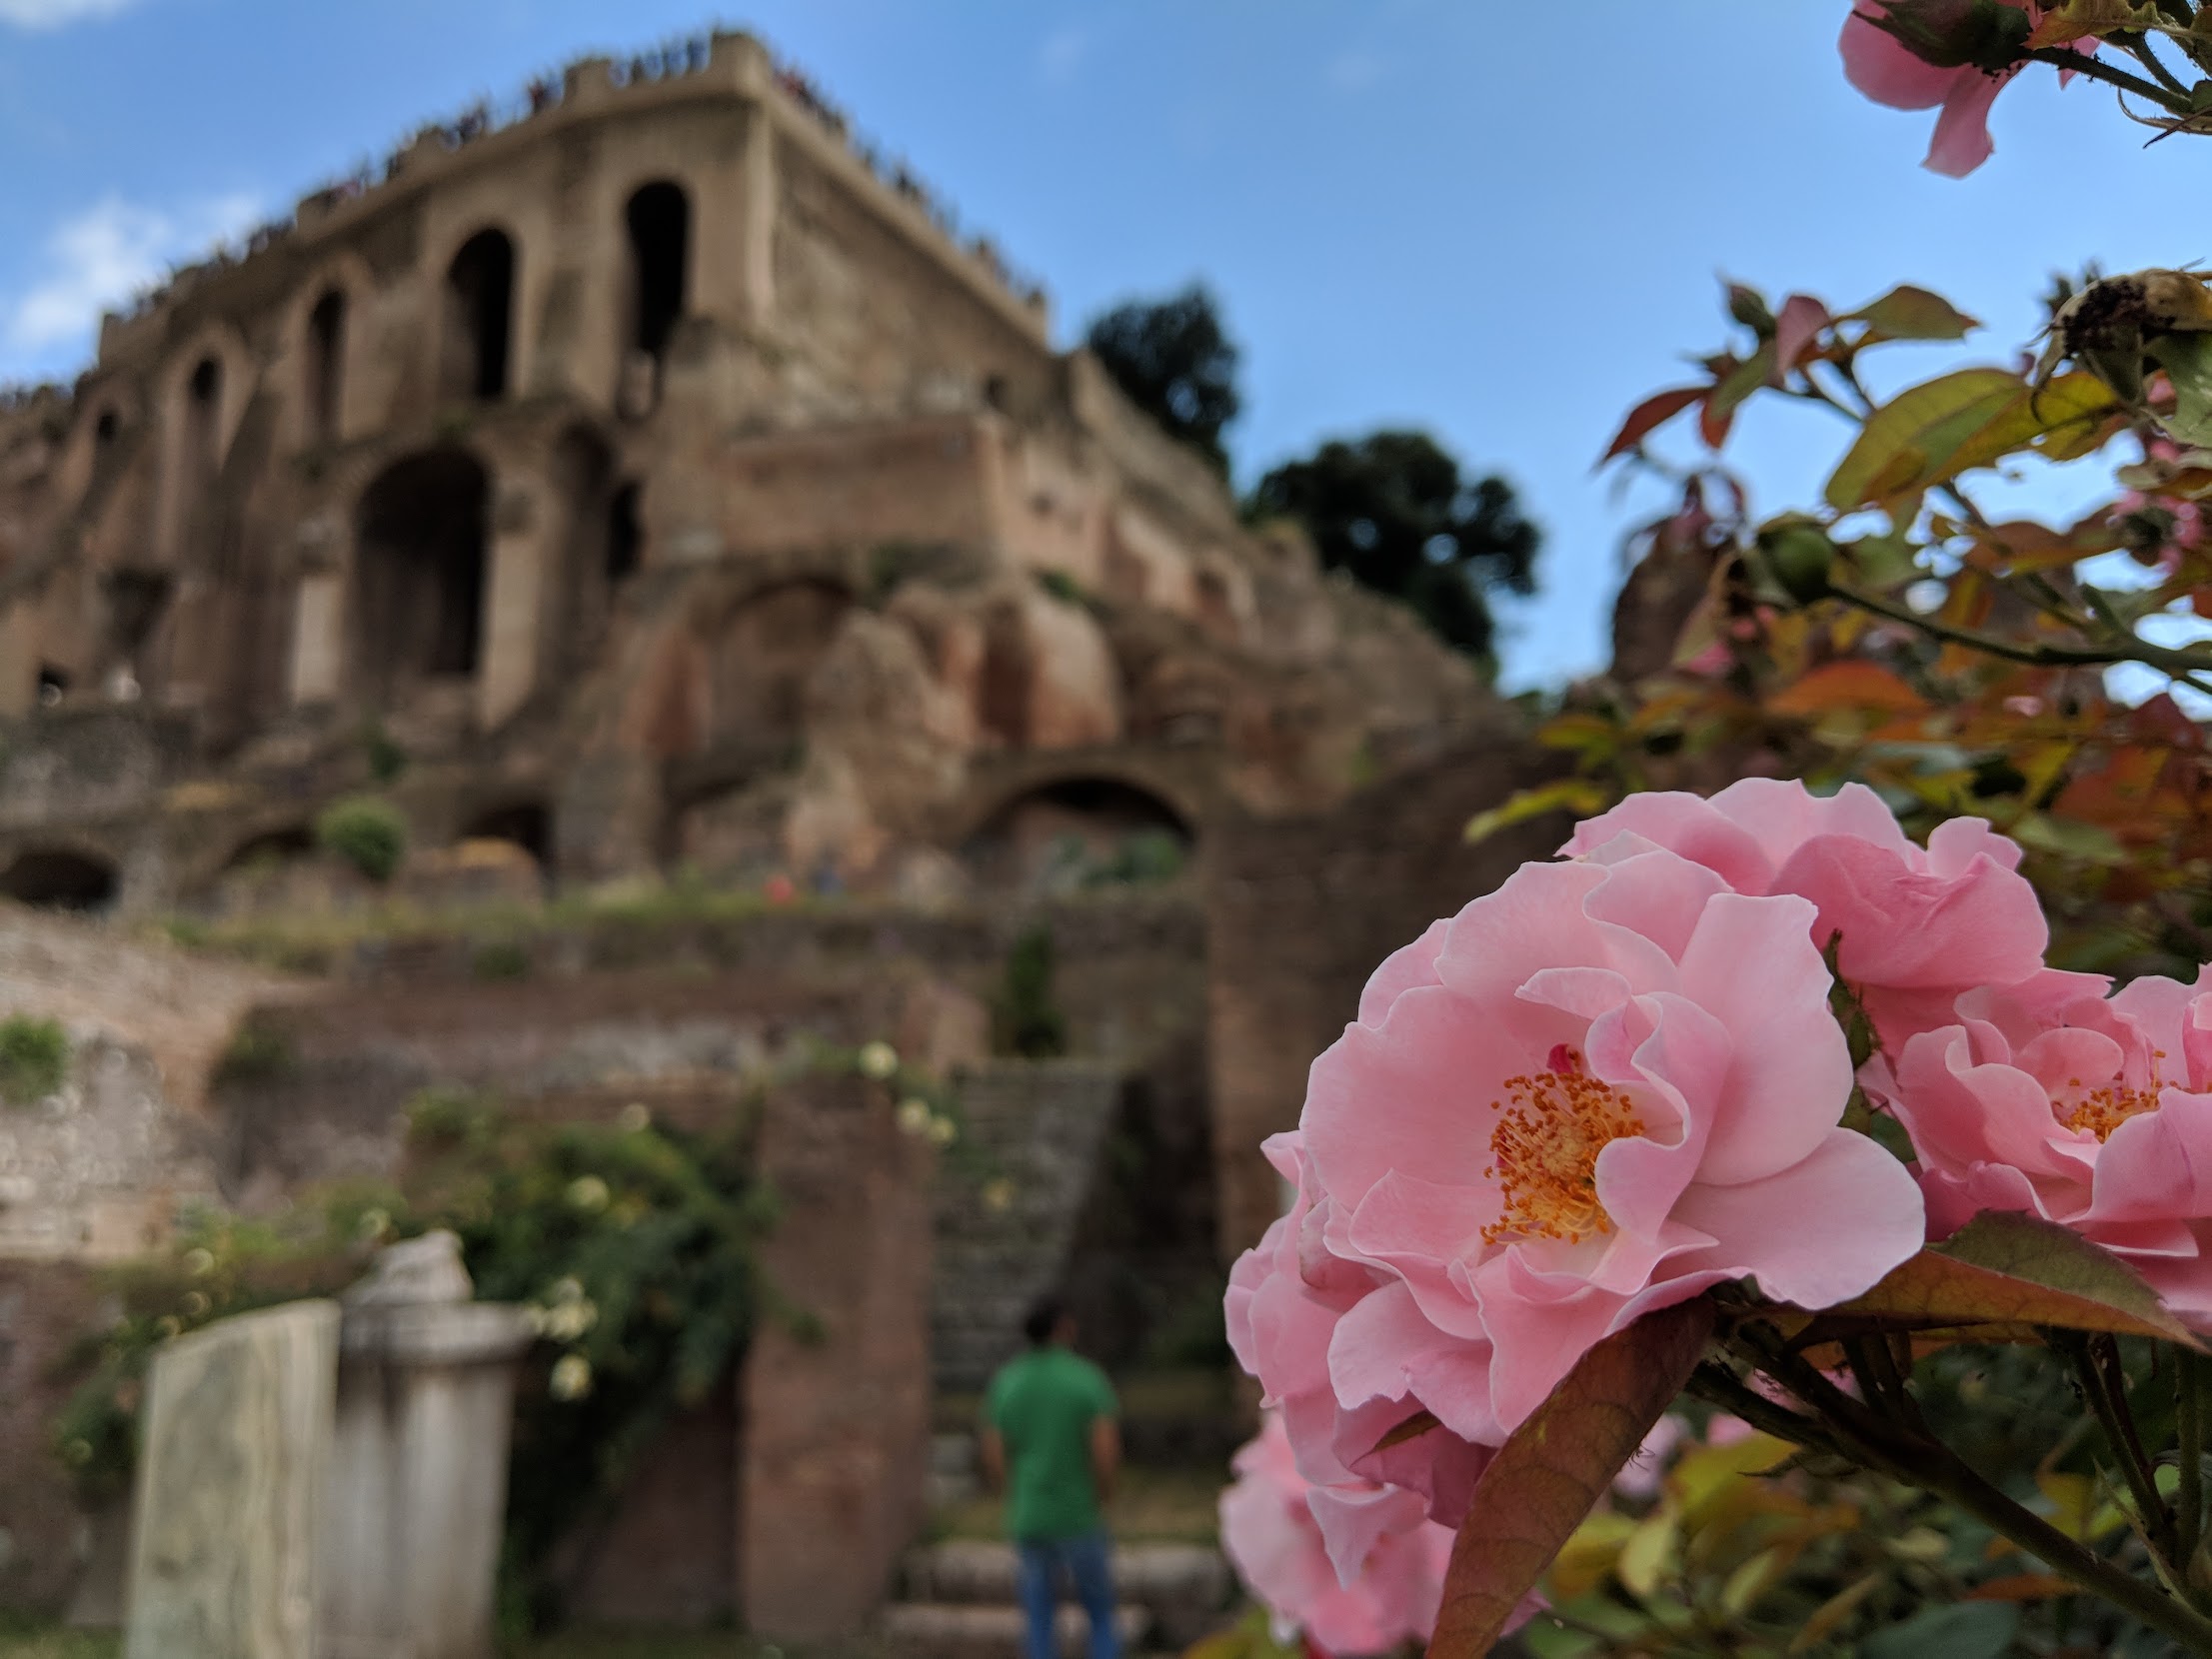 Pink flower in front of Historical monument in Rome, Italy.